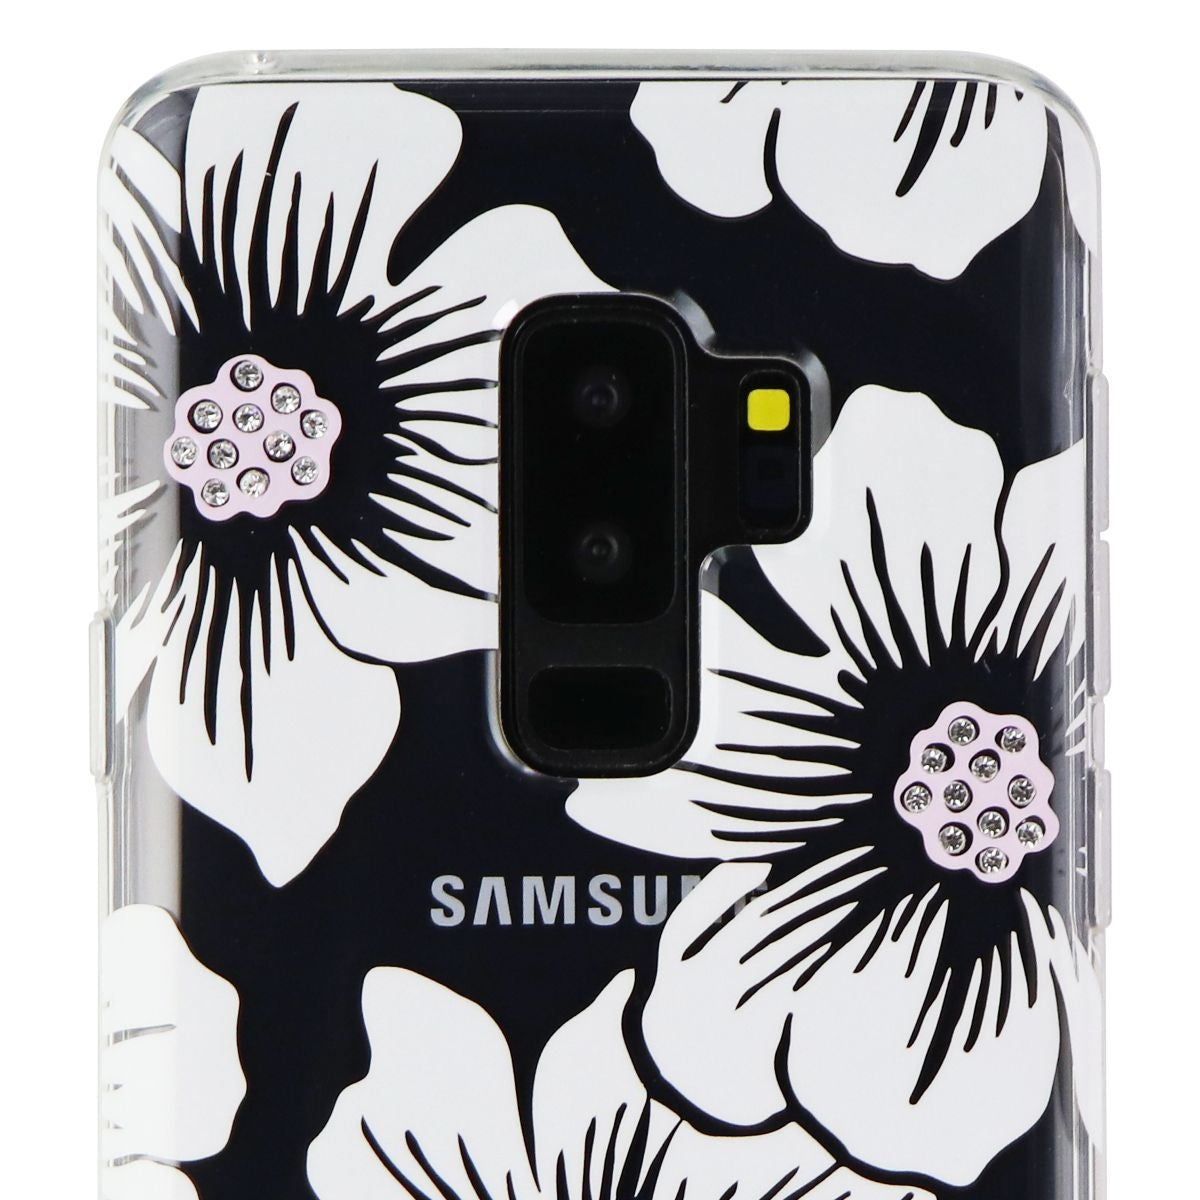 Kate Spade Hard Case for Samsung Galaxy S9+ (Plus) - Clear/White Flower/Gems Cell Phone - Cases, Covers & Skins Kate Spade    - Simple Cell Bulk Wholesale Pricing - USA Seller